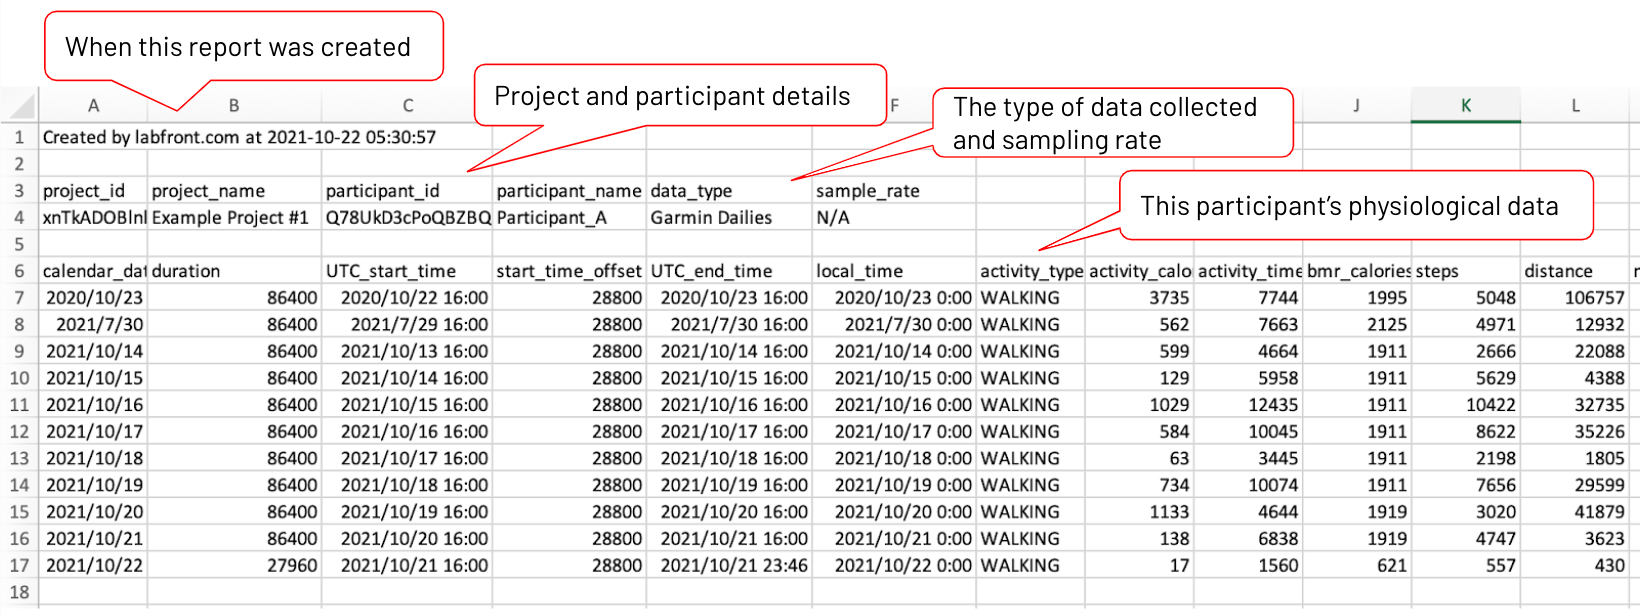 CSV file of dailies data with date, project and participant details, type of data collected and sampling rate, and participant's physiological data